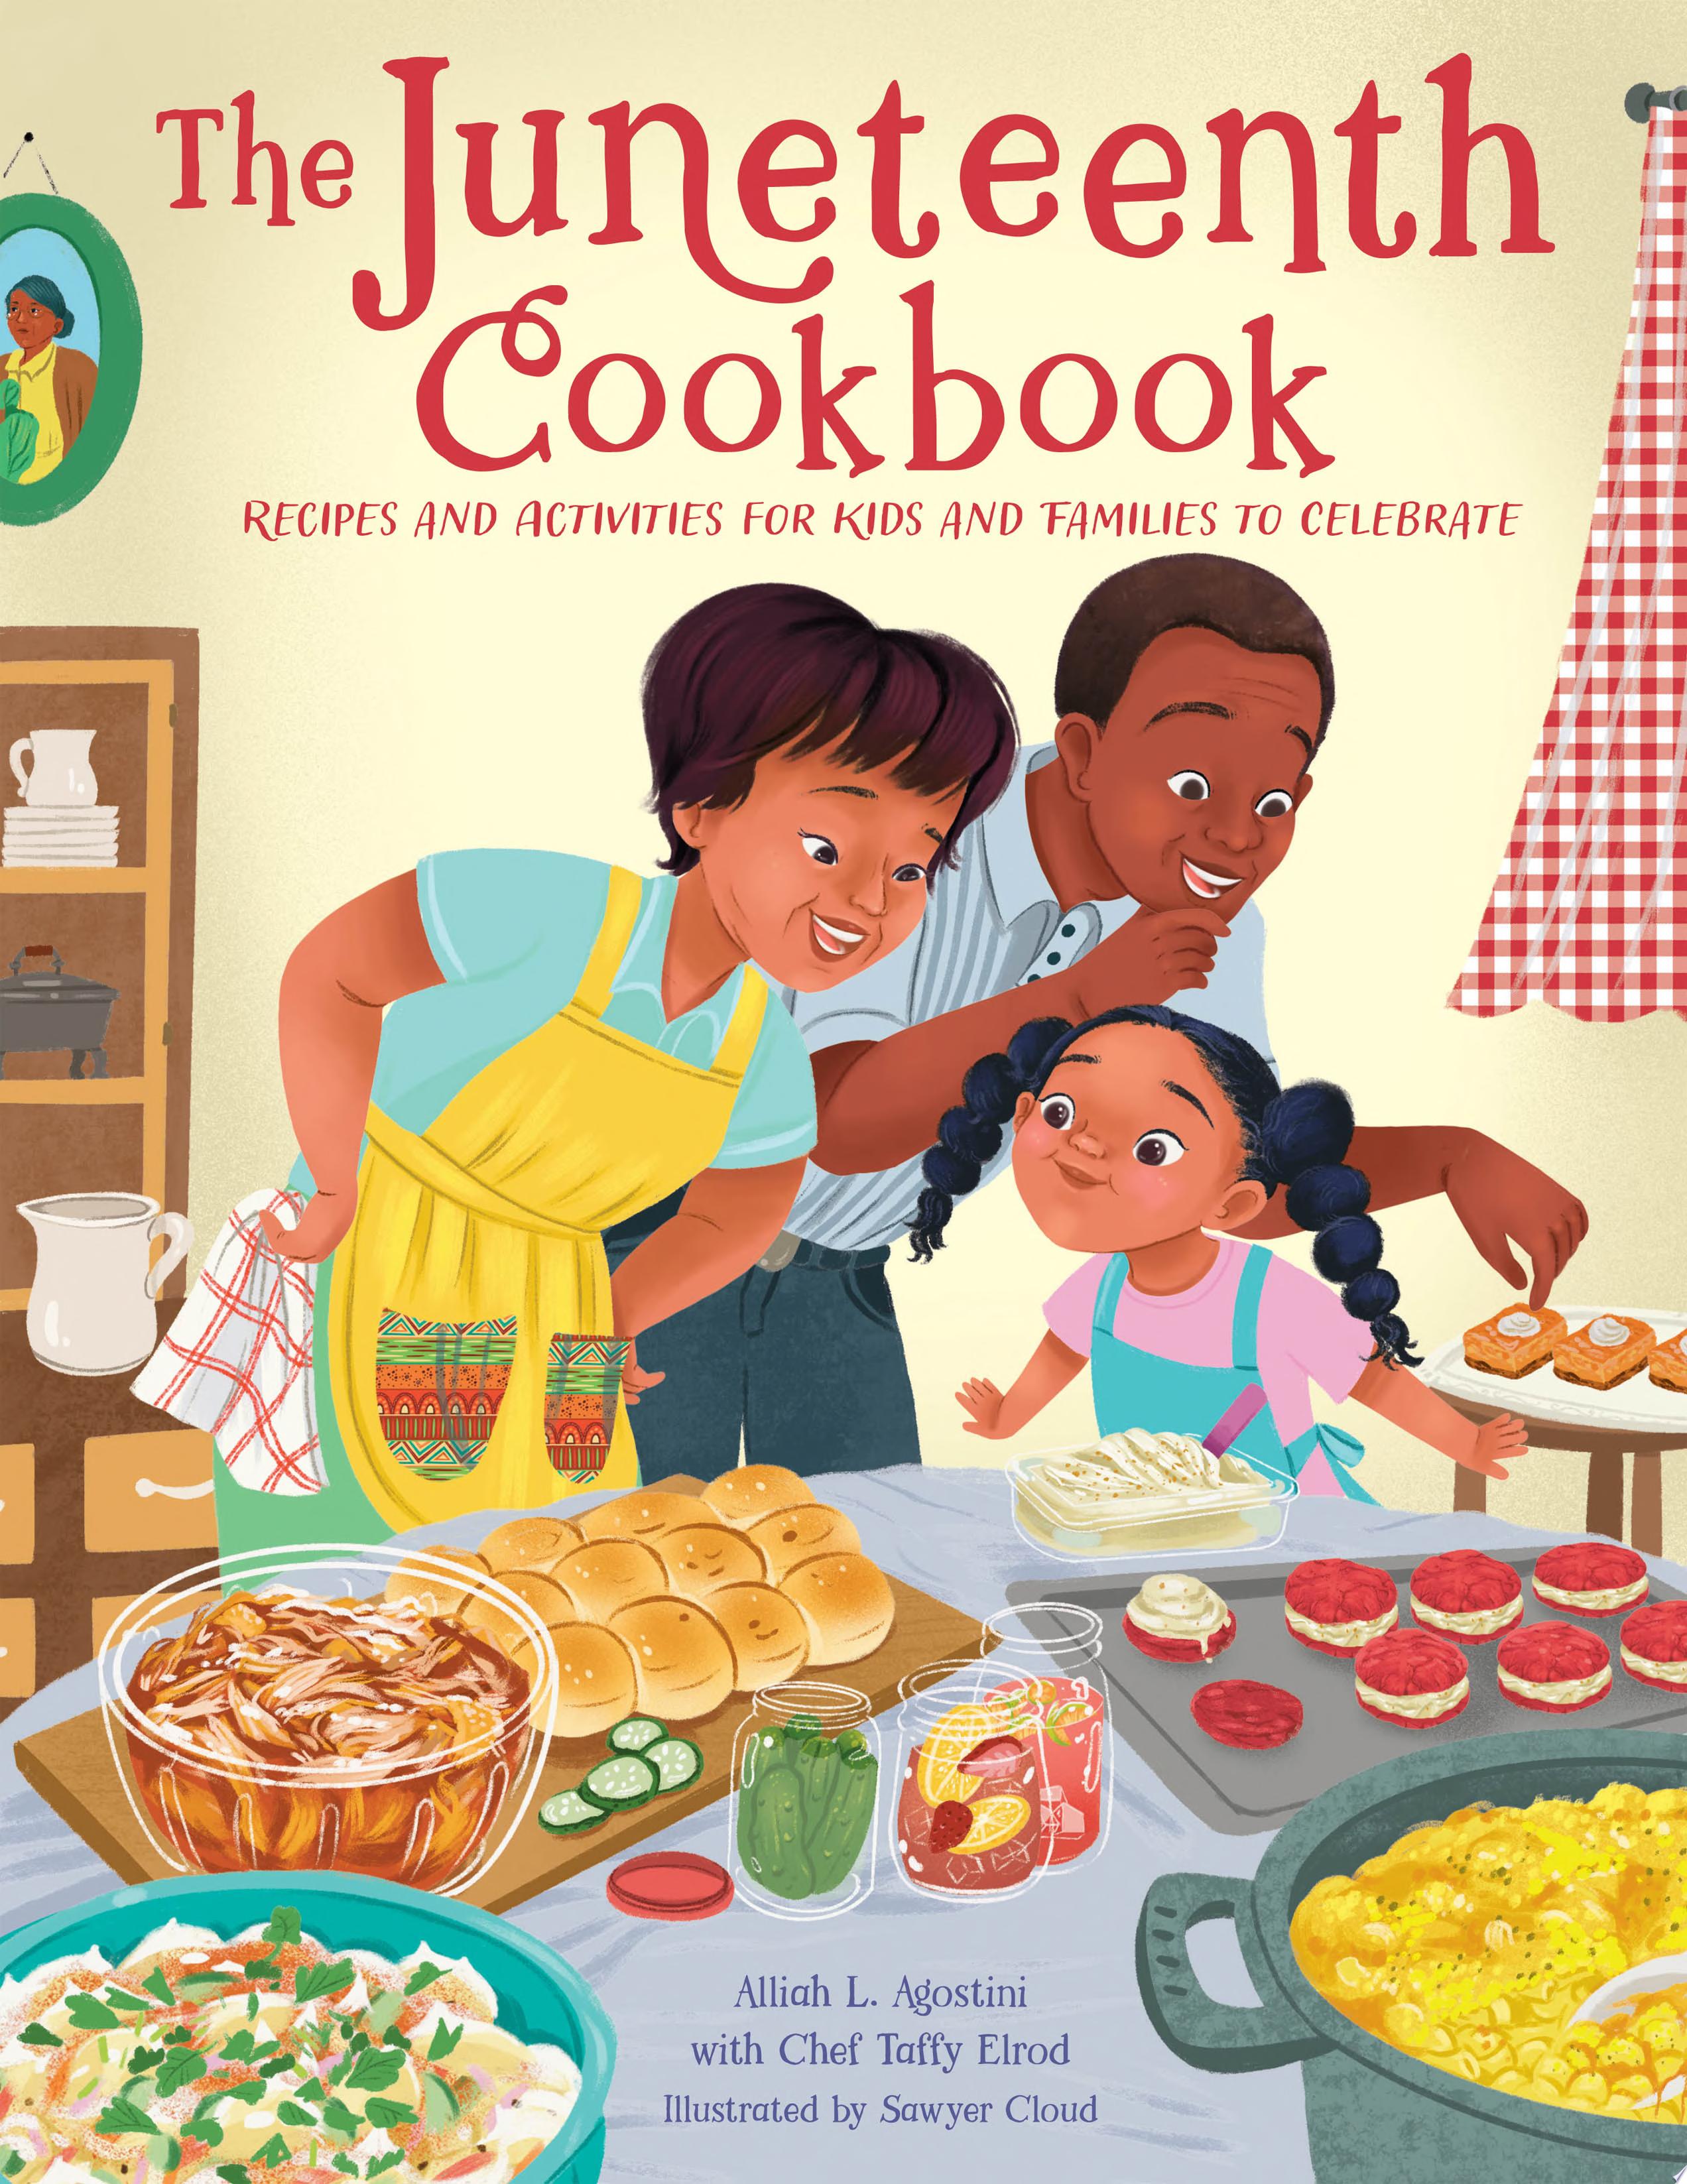 Image for "The Juneteenth Cookbook"